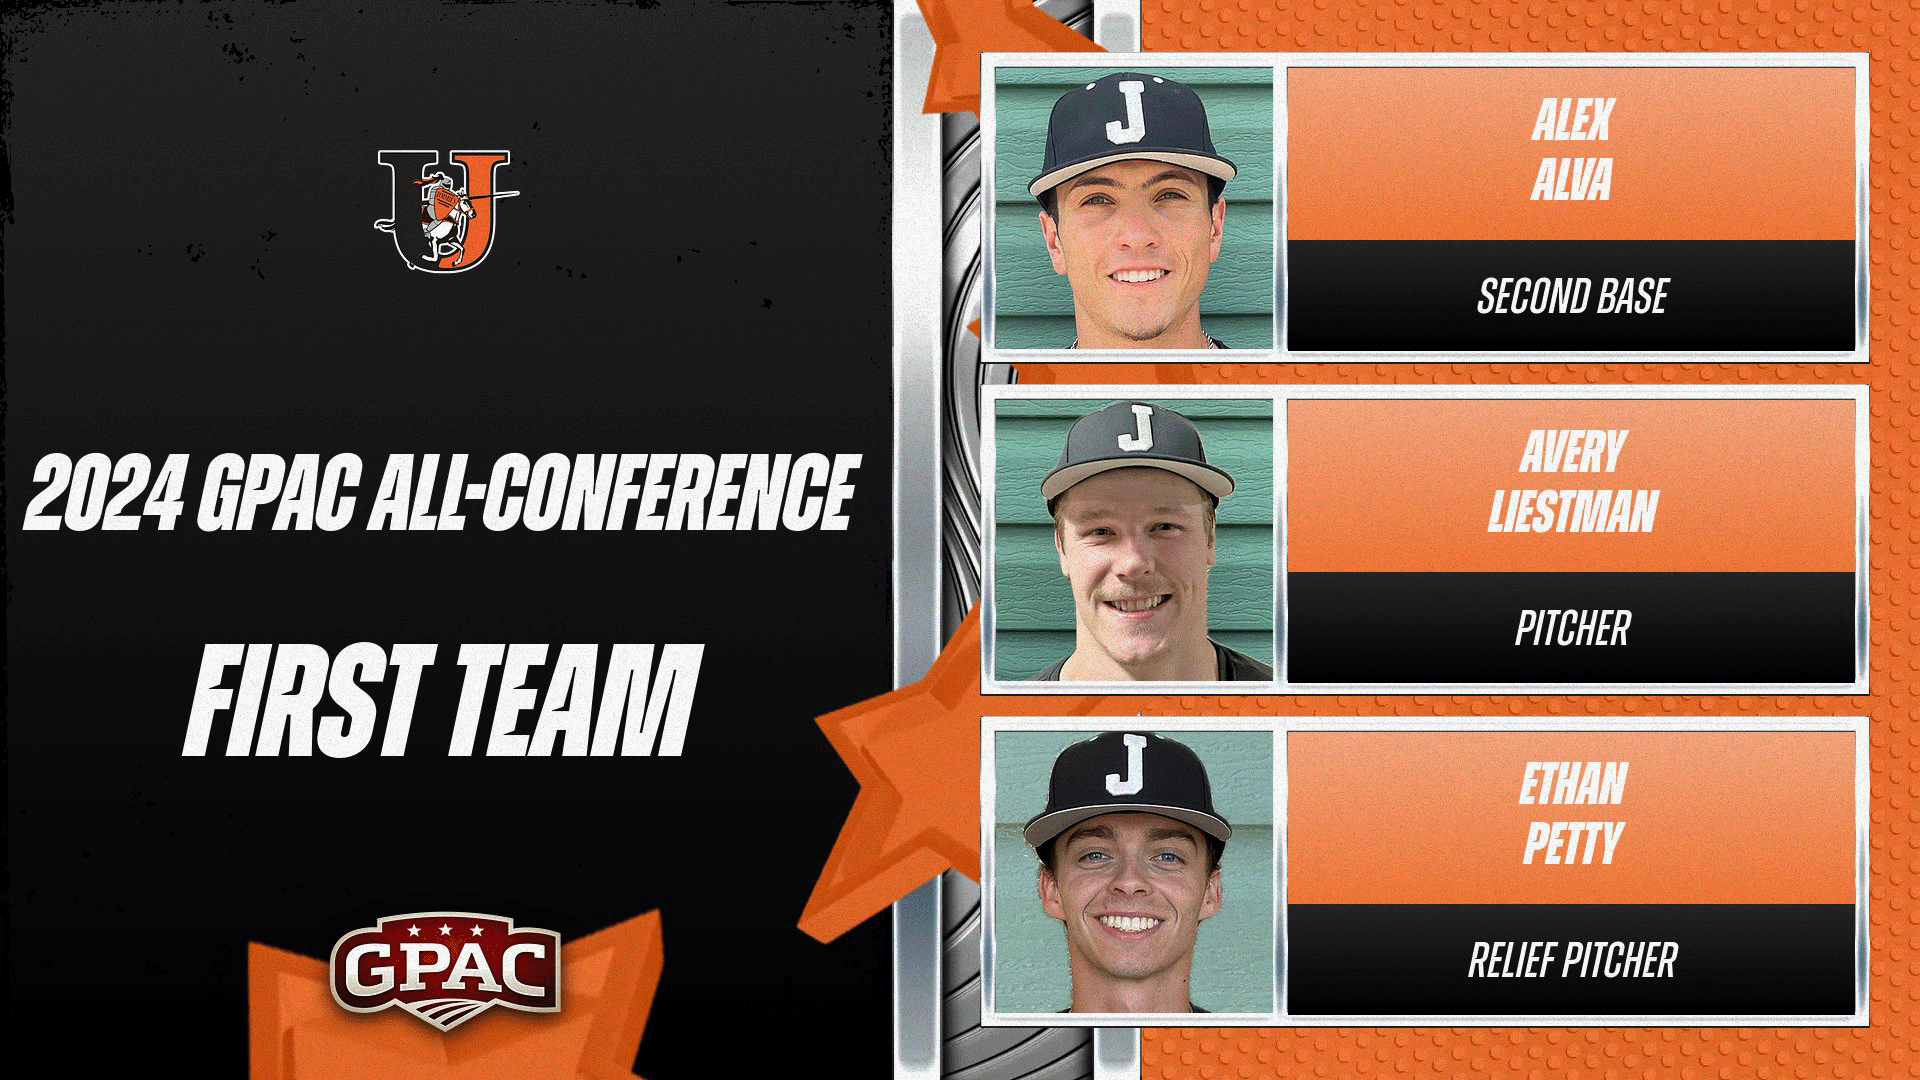 Alva, Liestman, Petty headline Jimmie GPAC all-conference selections